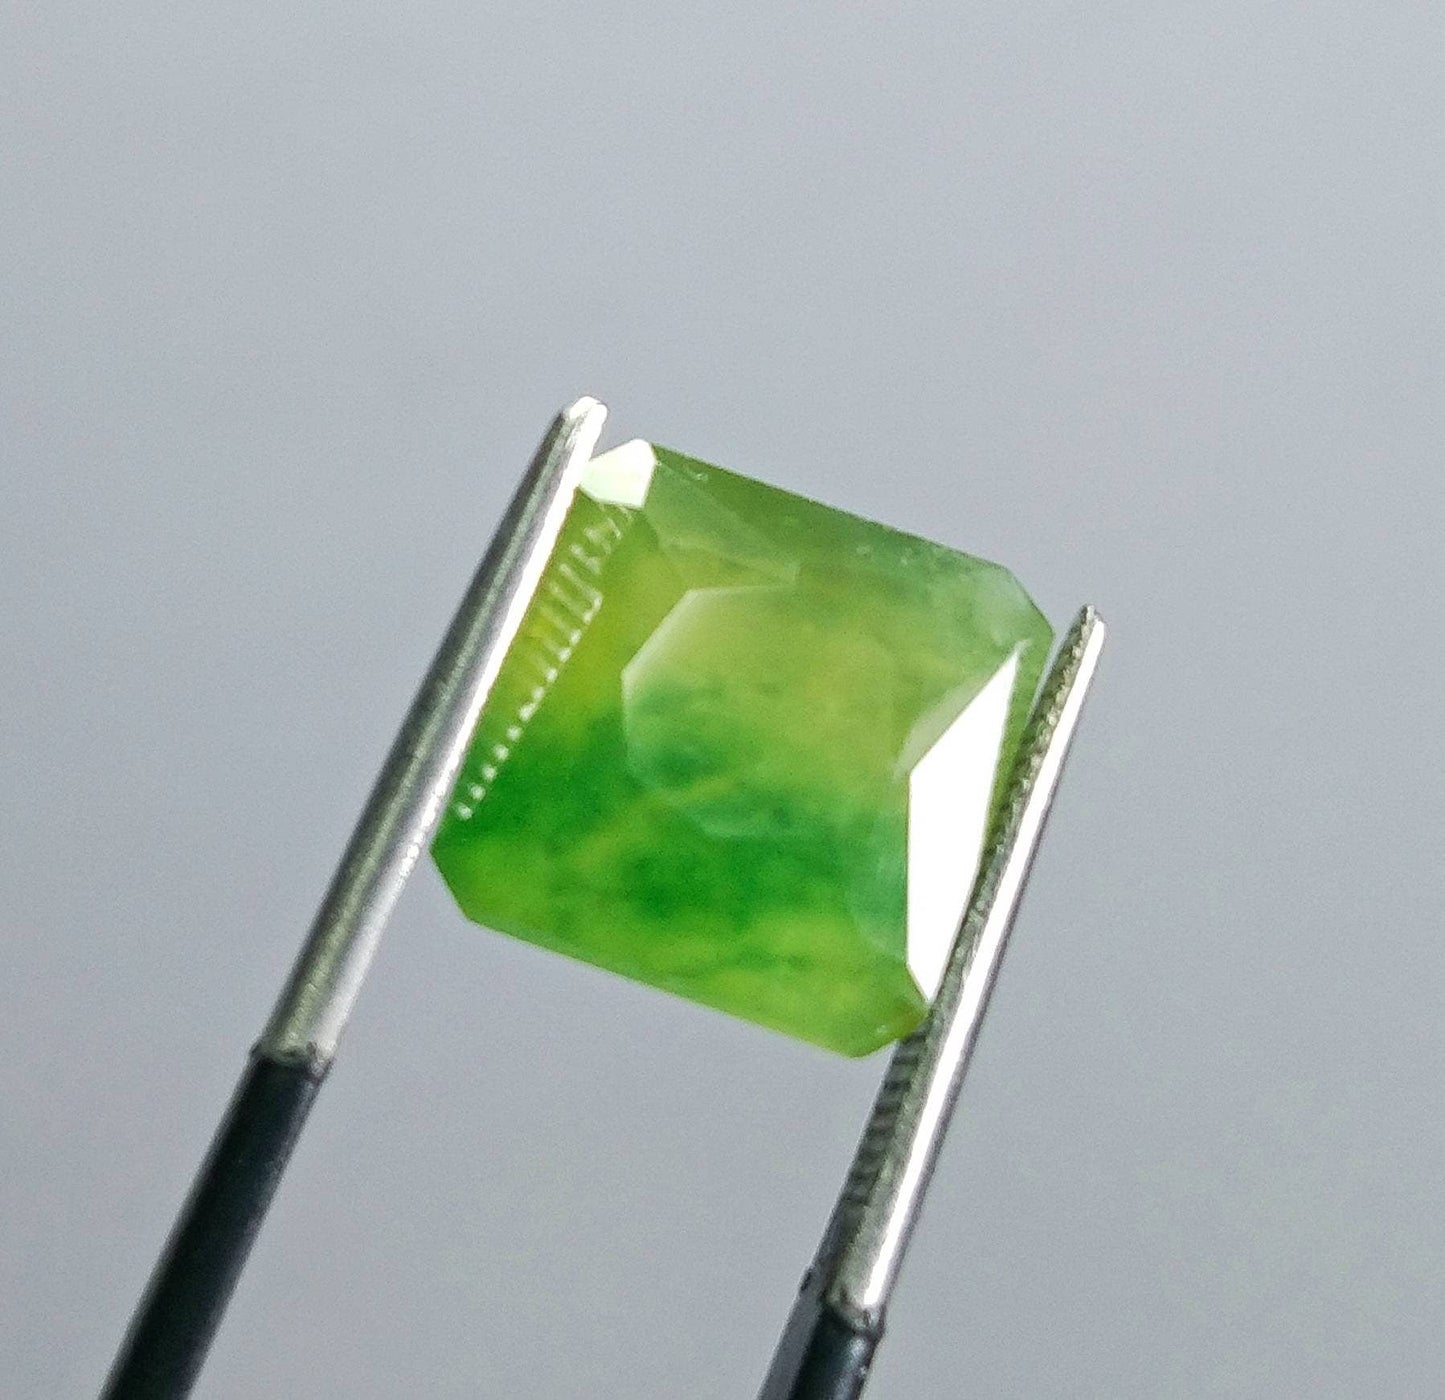 ARSAA GEMS AND MINERALSNatural fine quality beautiful 8.5 carats green radiant cut shape Faceted hydrograssular garnet gem - Premium  from ARSAA GEMS AND MINERALS - Just $25.00! Shop now at ARSAA GEMS AND MINERALS